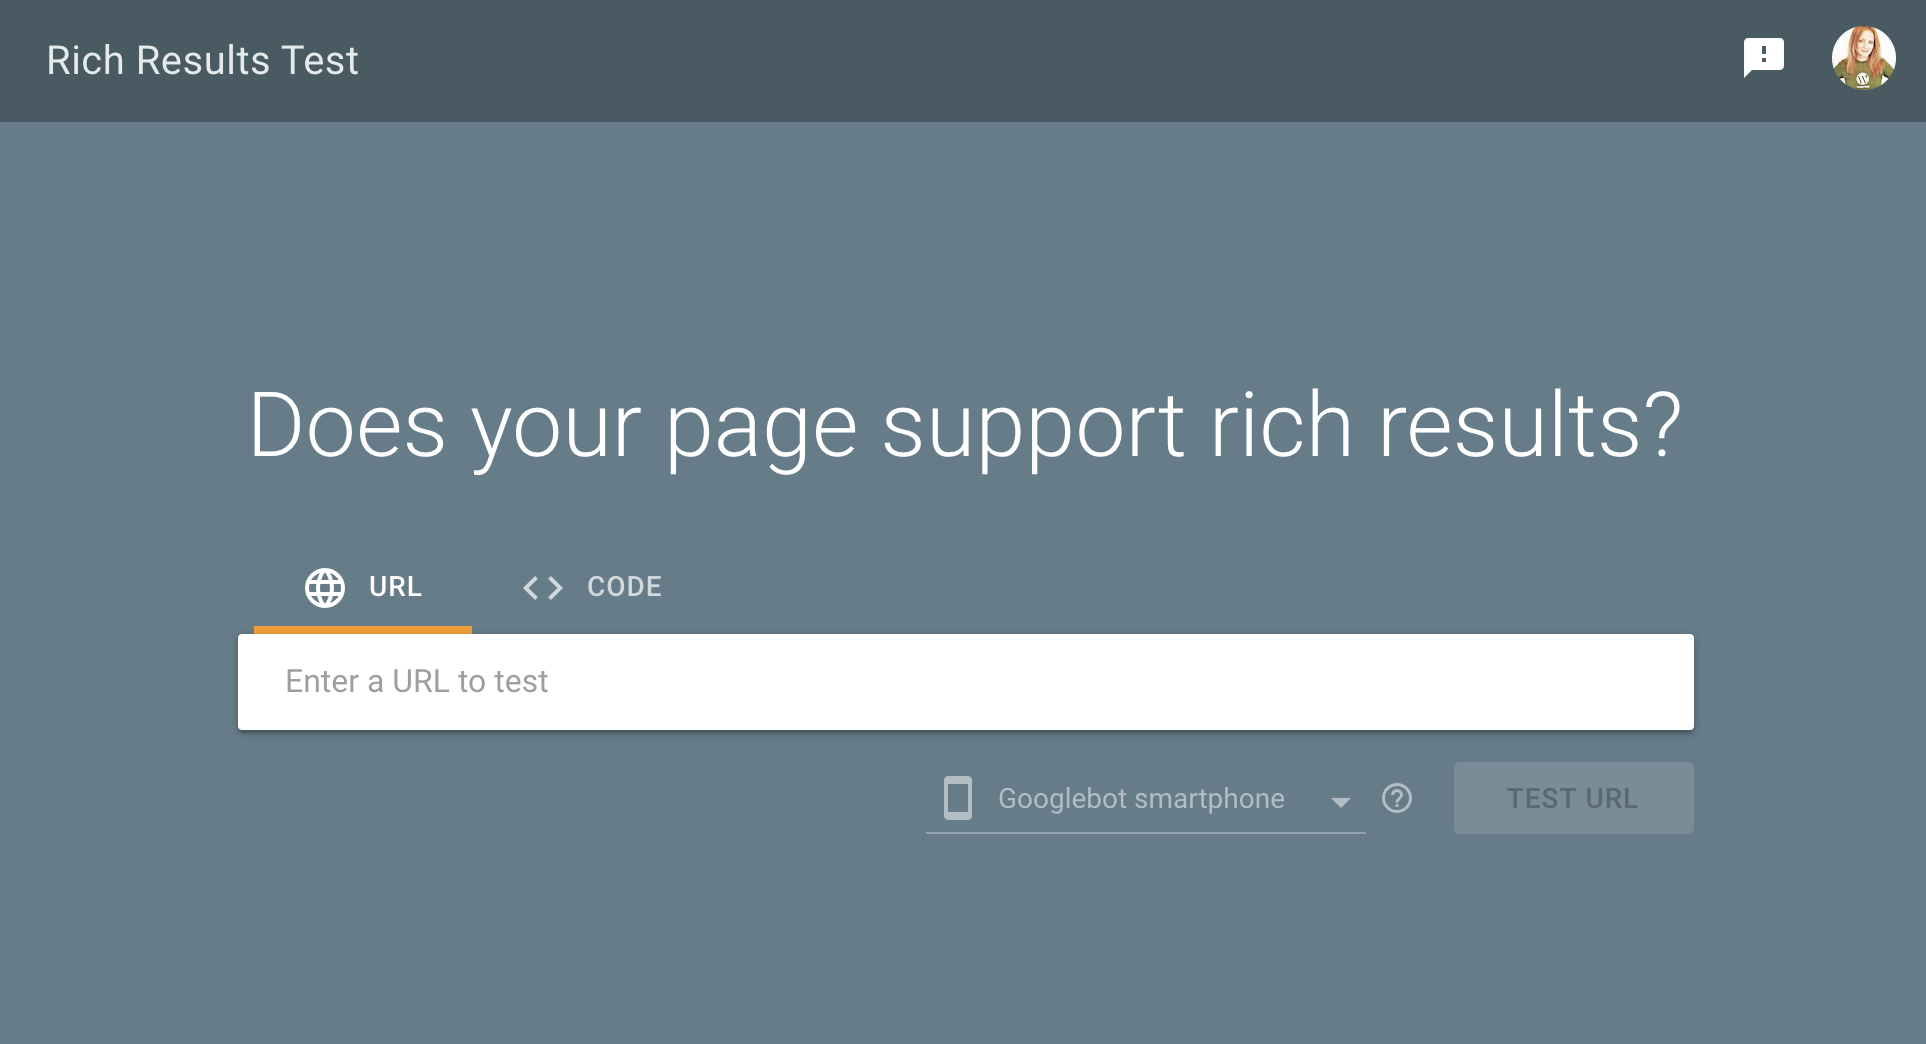 Google Adds New Desktop/Mobile Selector to the Rich Results Testing Tool